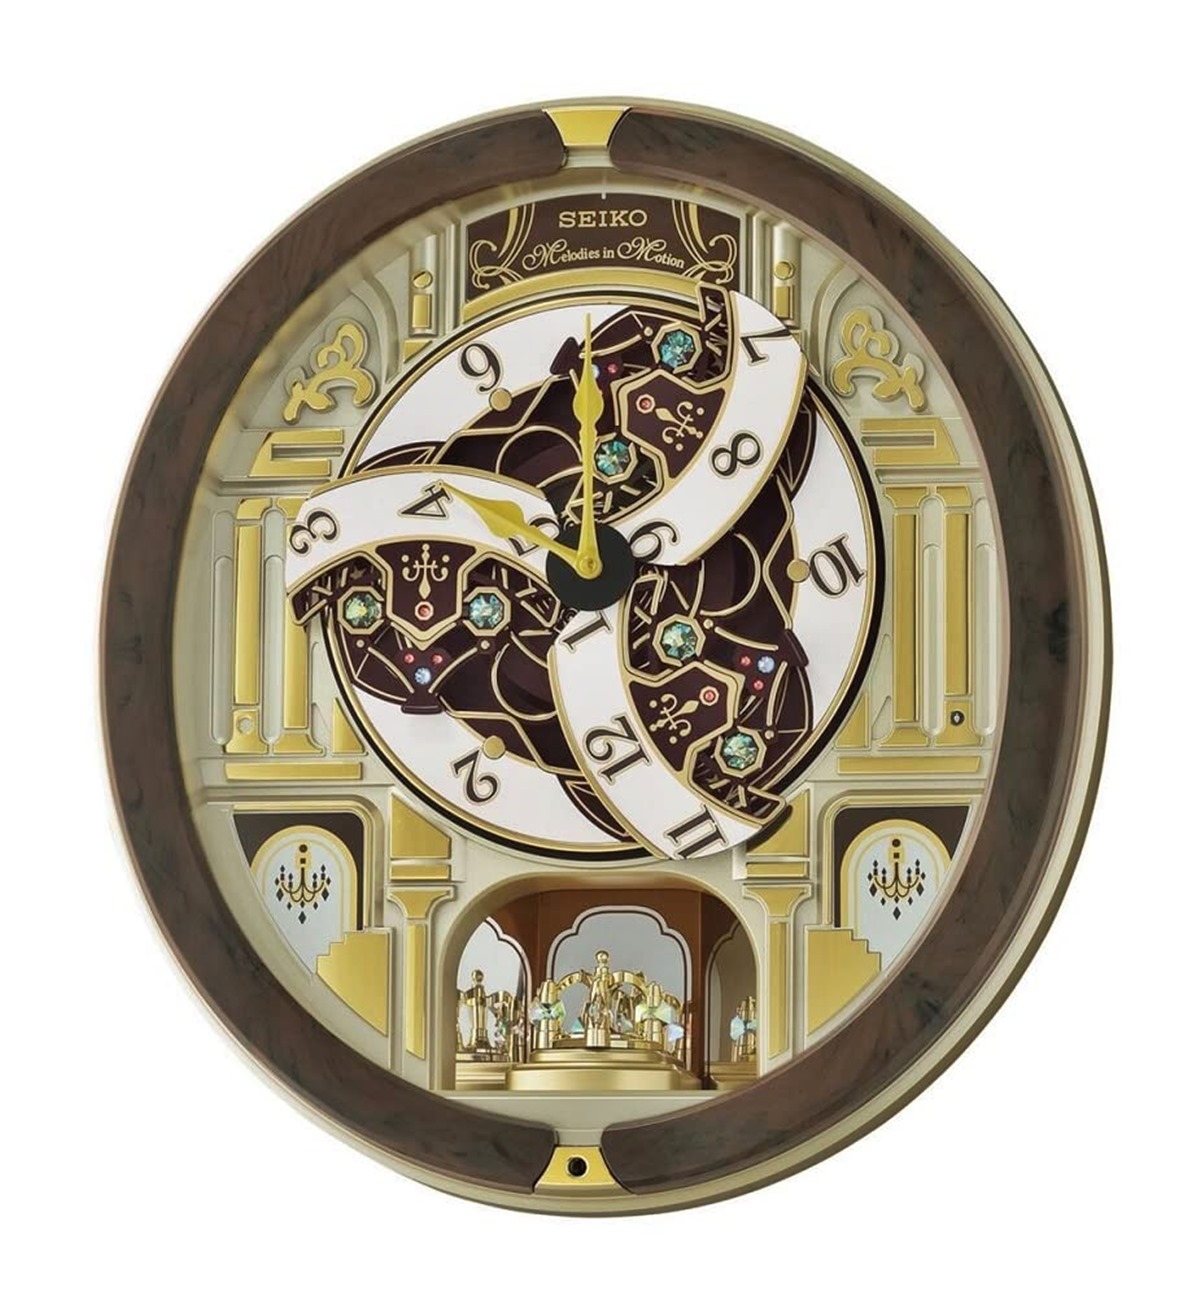 14 Amazing Seiko Melodies In Motion Wall Clock for 2023